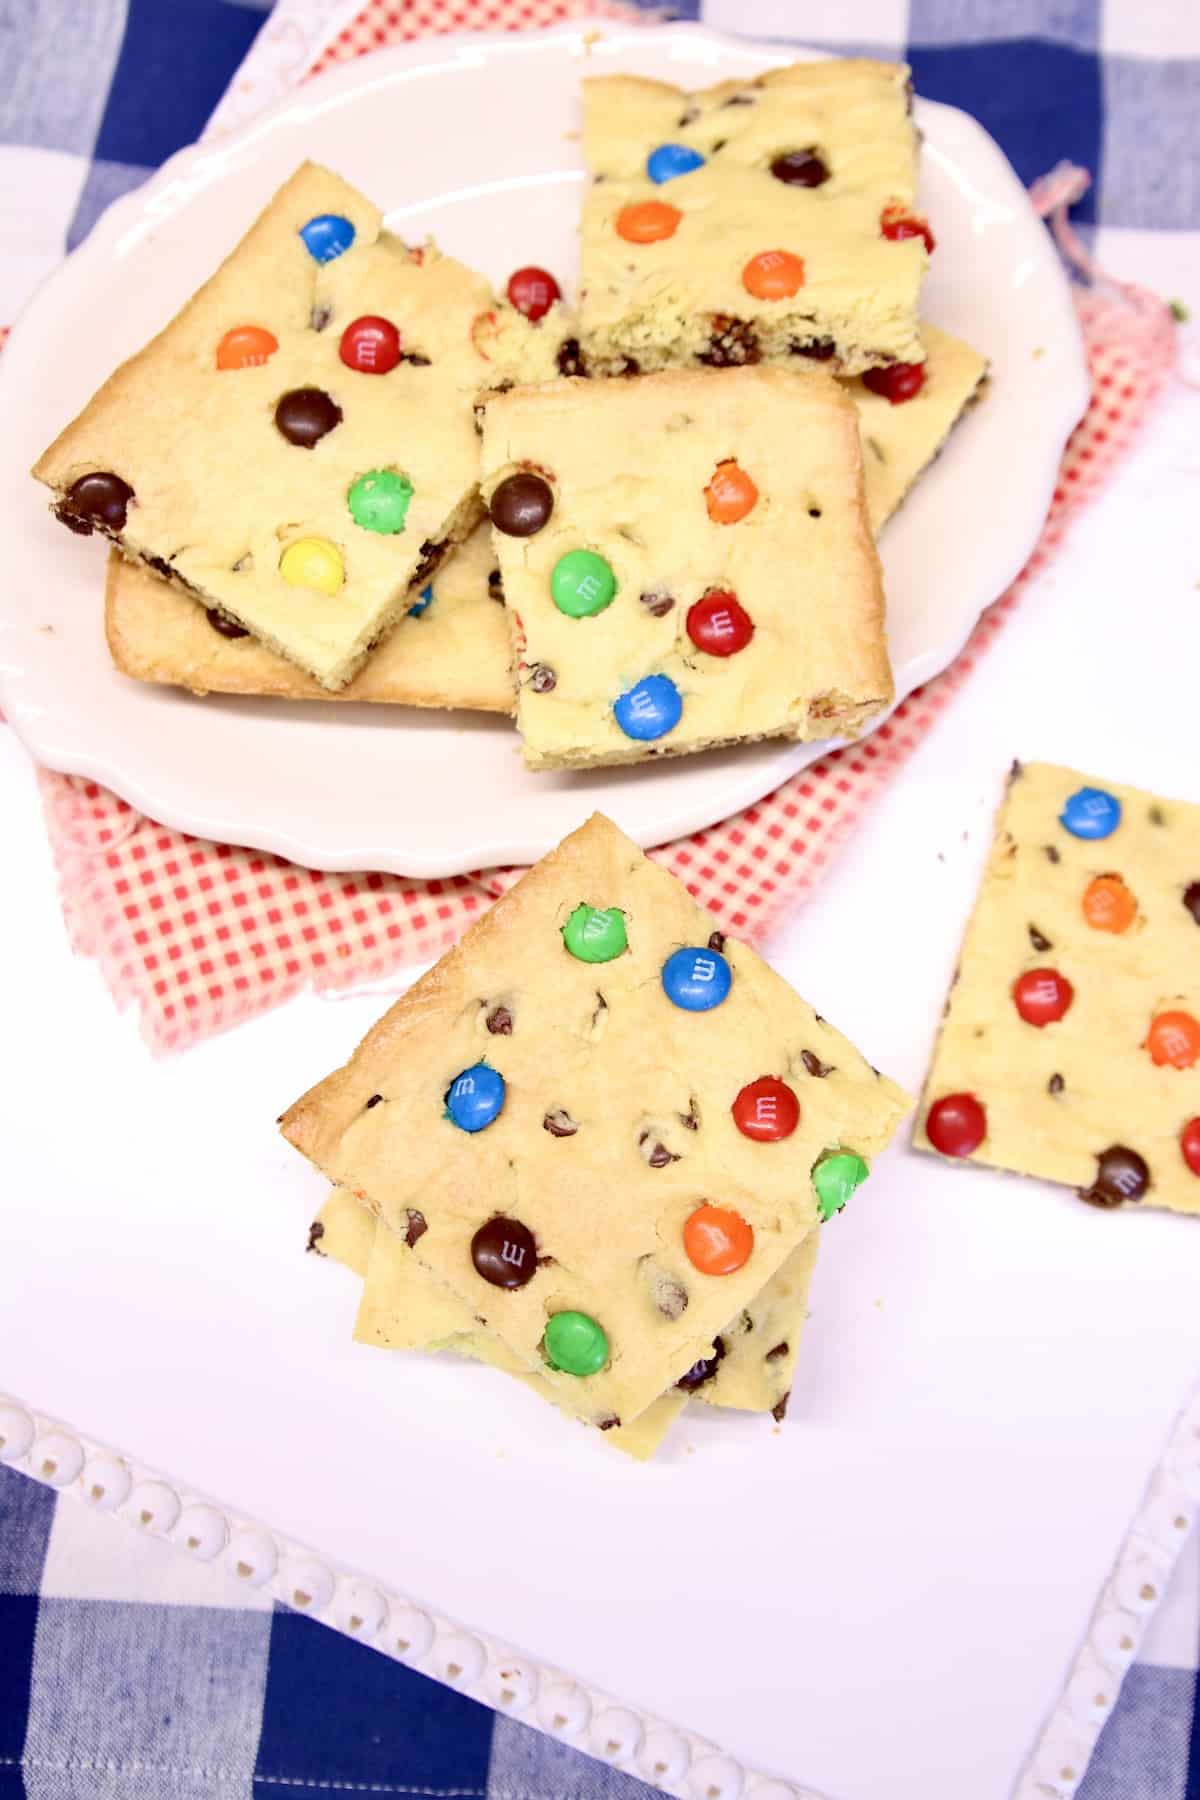 Cake mix bars with chocolate chips and m&m's.